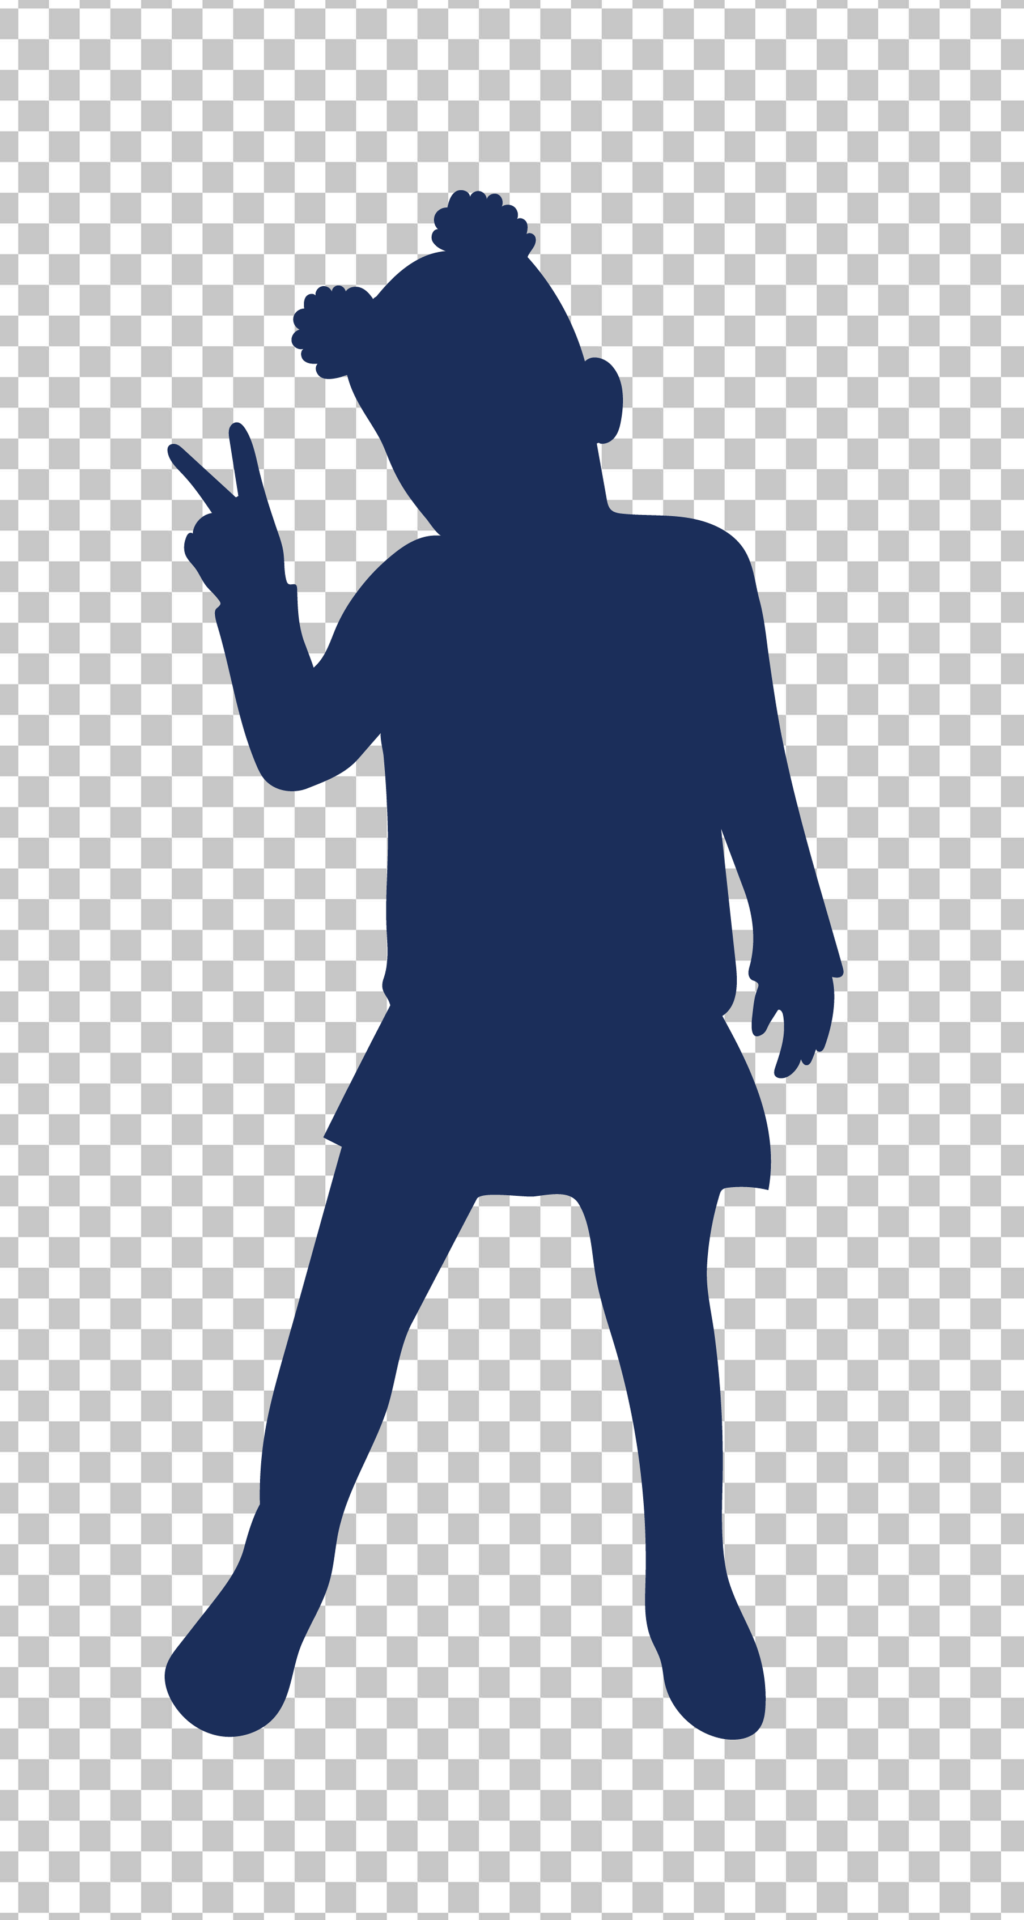 Child Giving the Peace Sign Silhouette PNG Image